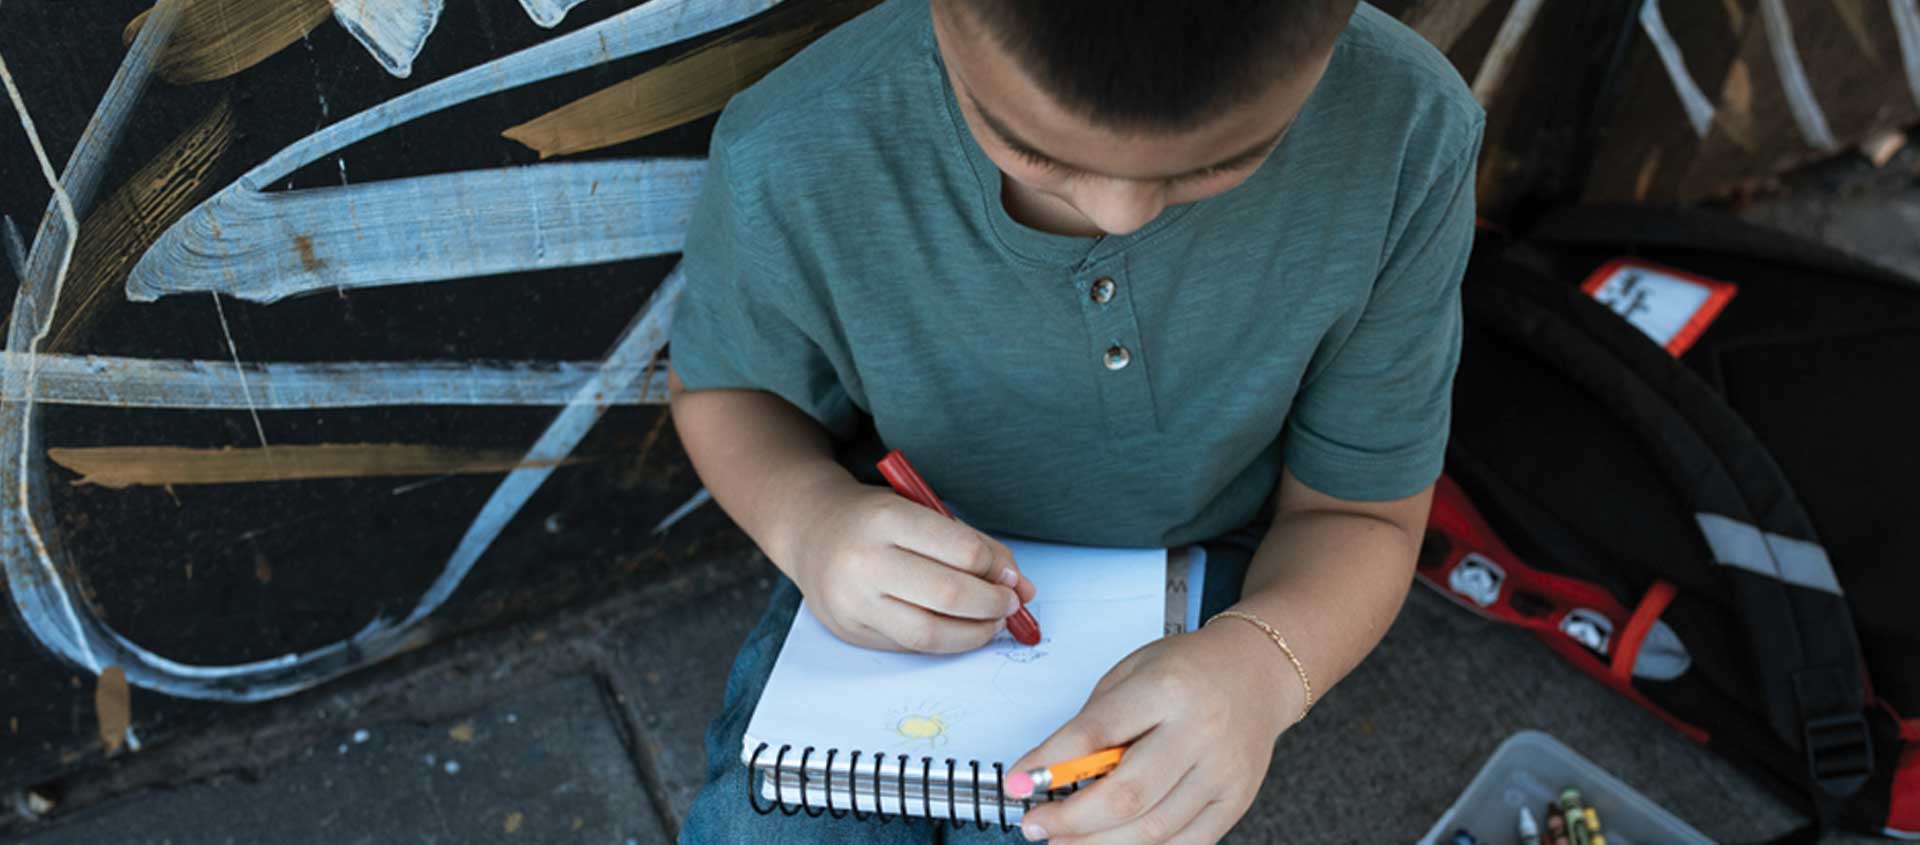 A young boy sits on a sidewalk with a sketch book open on his lap. 